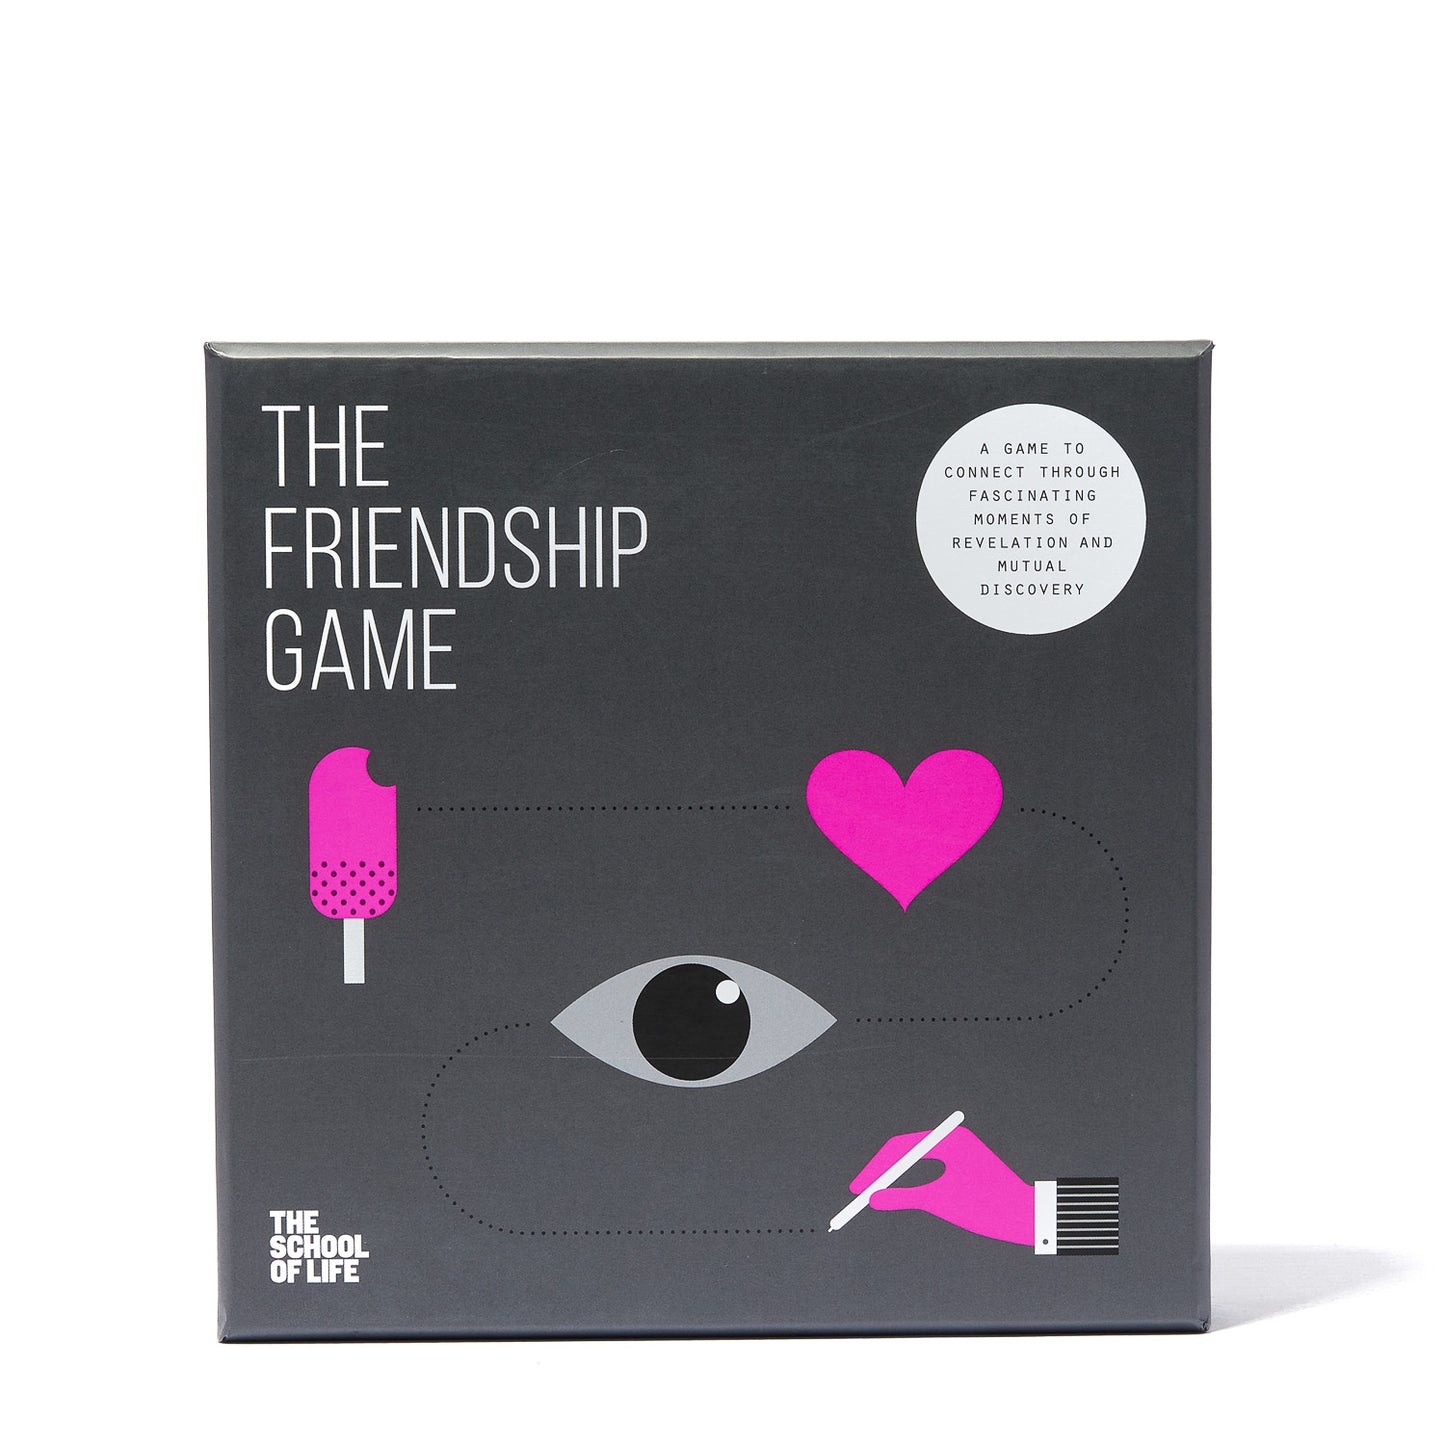 THE FRIENDSHIP GAME